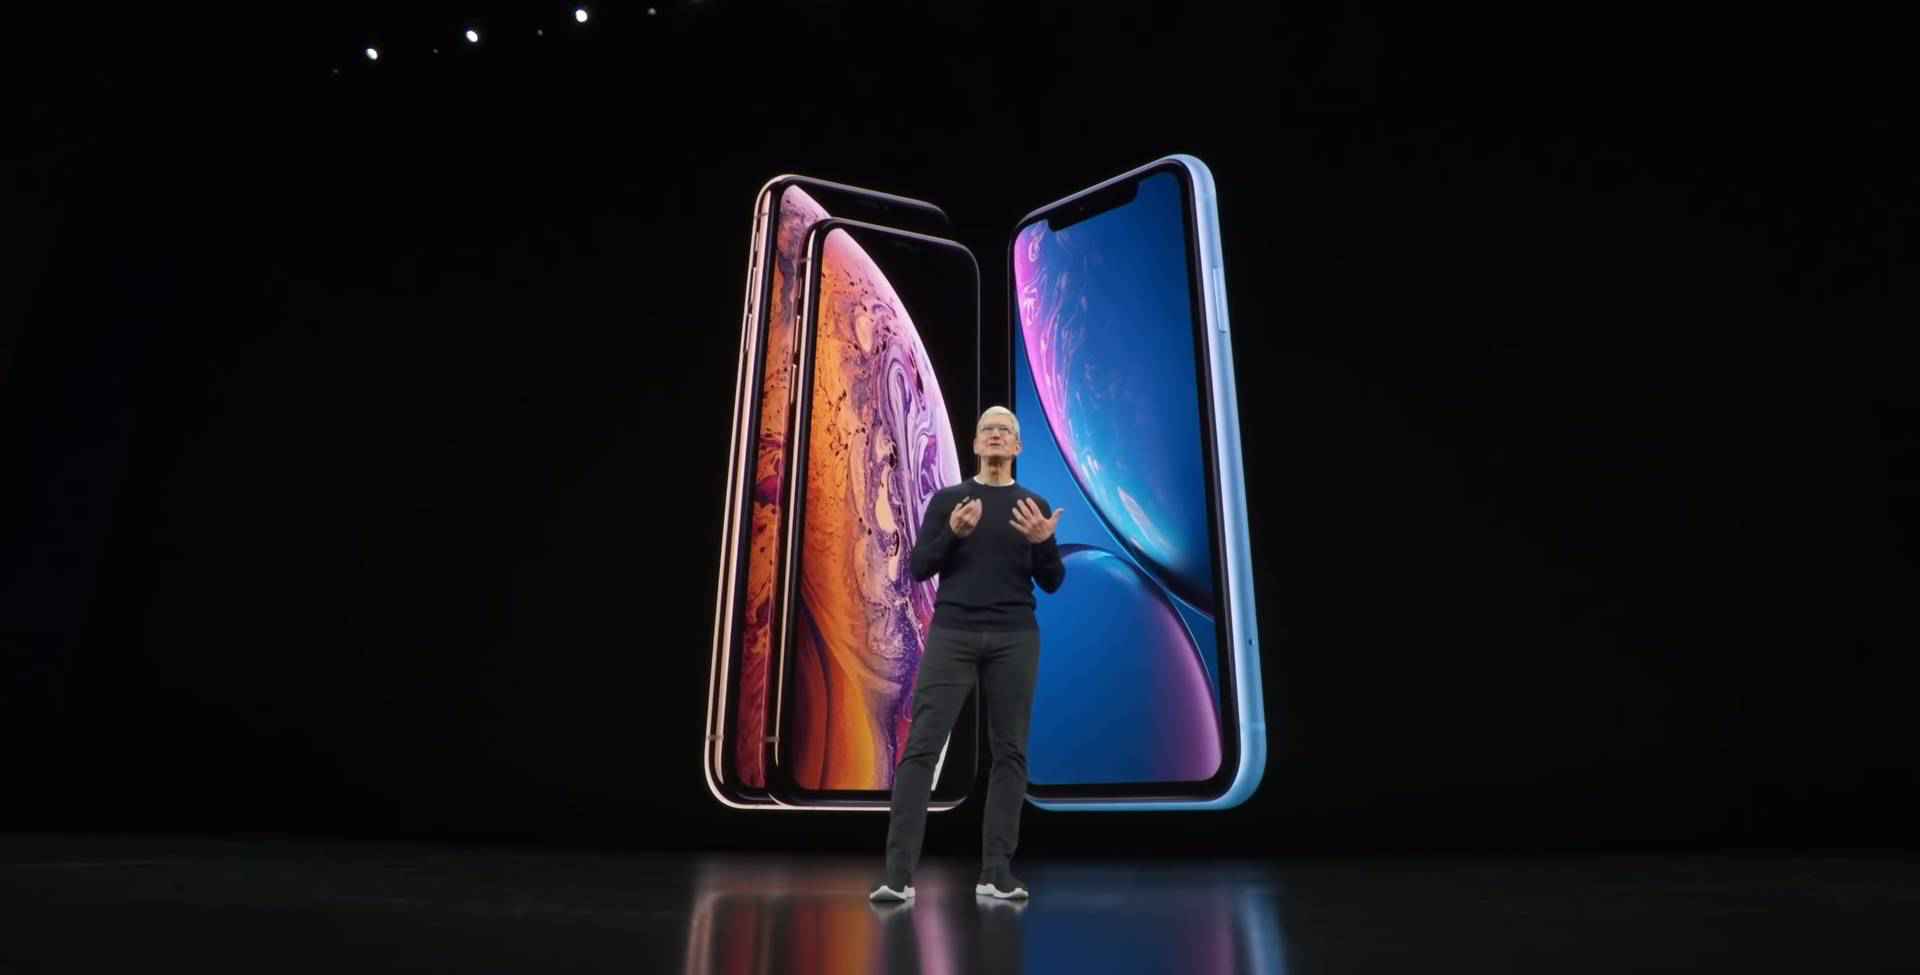 Tim Cook presenting new iPhone